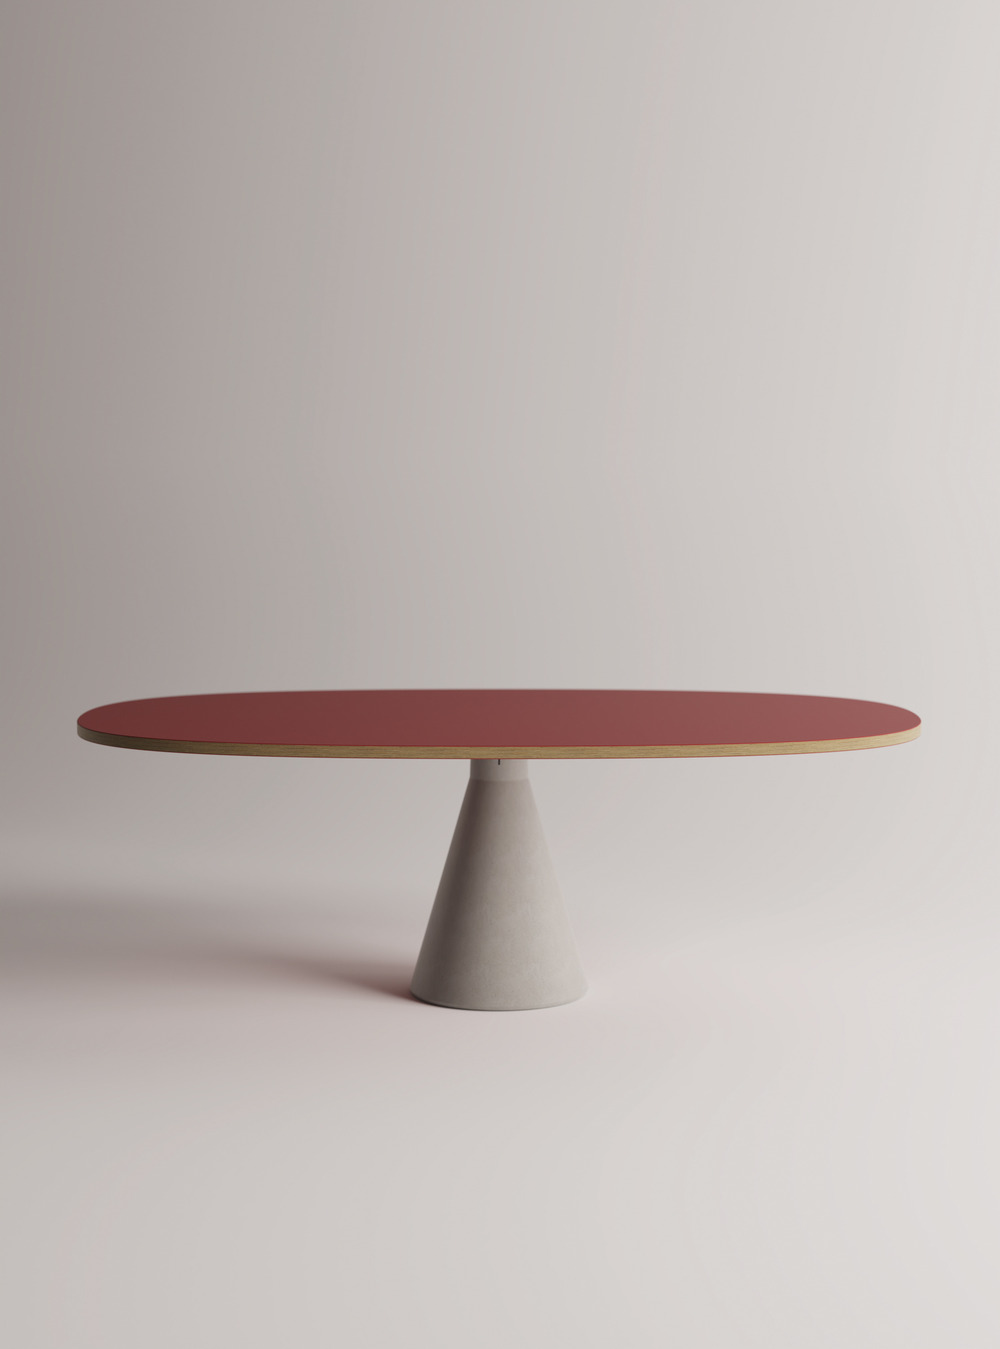 Agapecasa reissues the “Club 44” table designed in 1957 by Angelo Mangiarotti